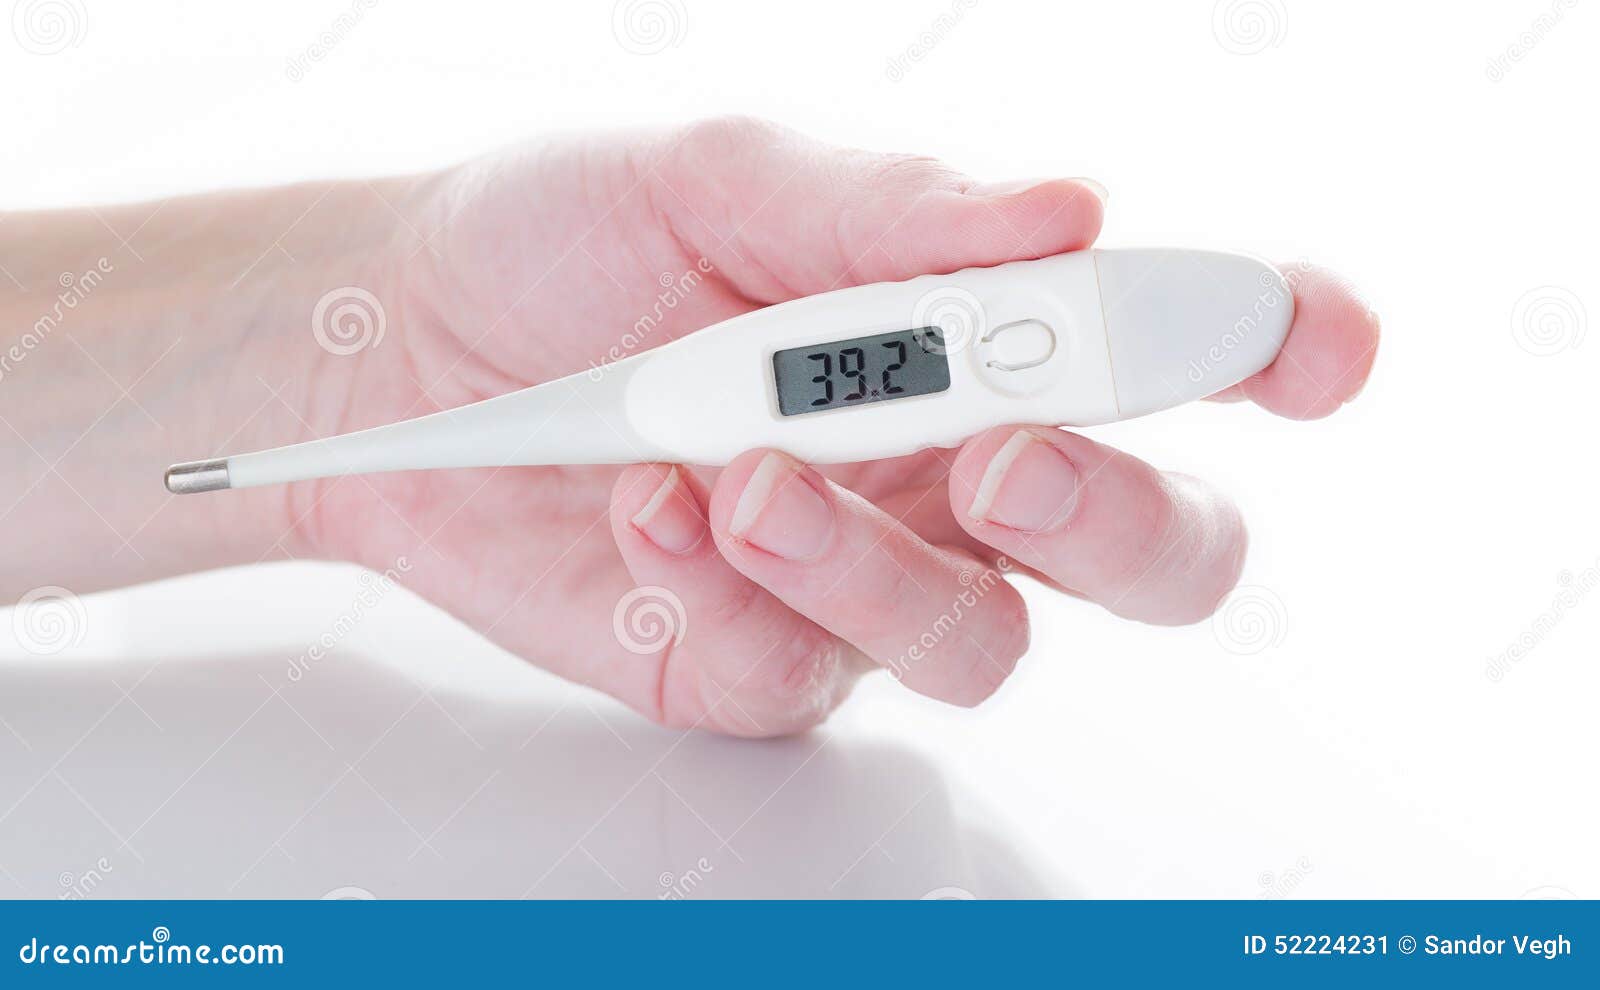 Woman s hand holding thermometer indicating a high temperature